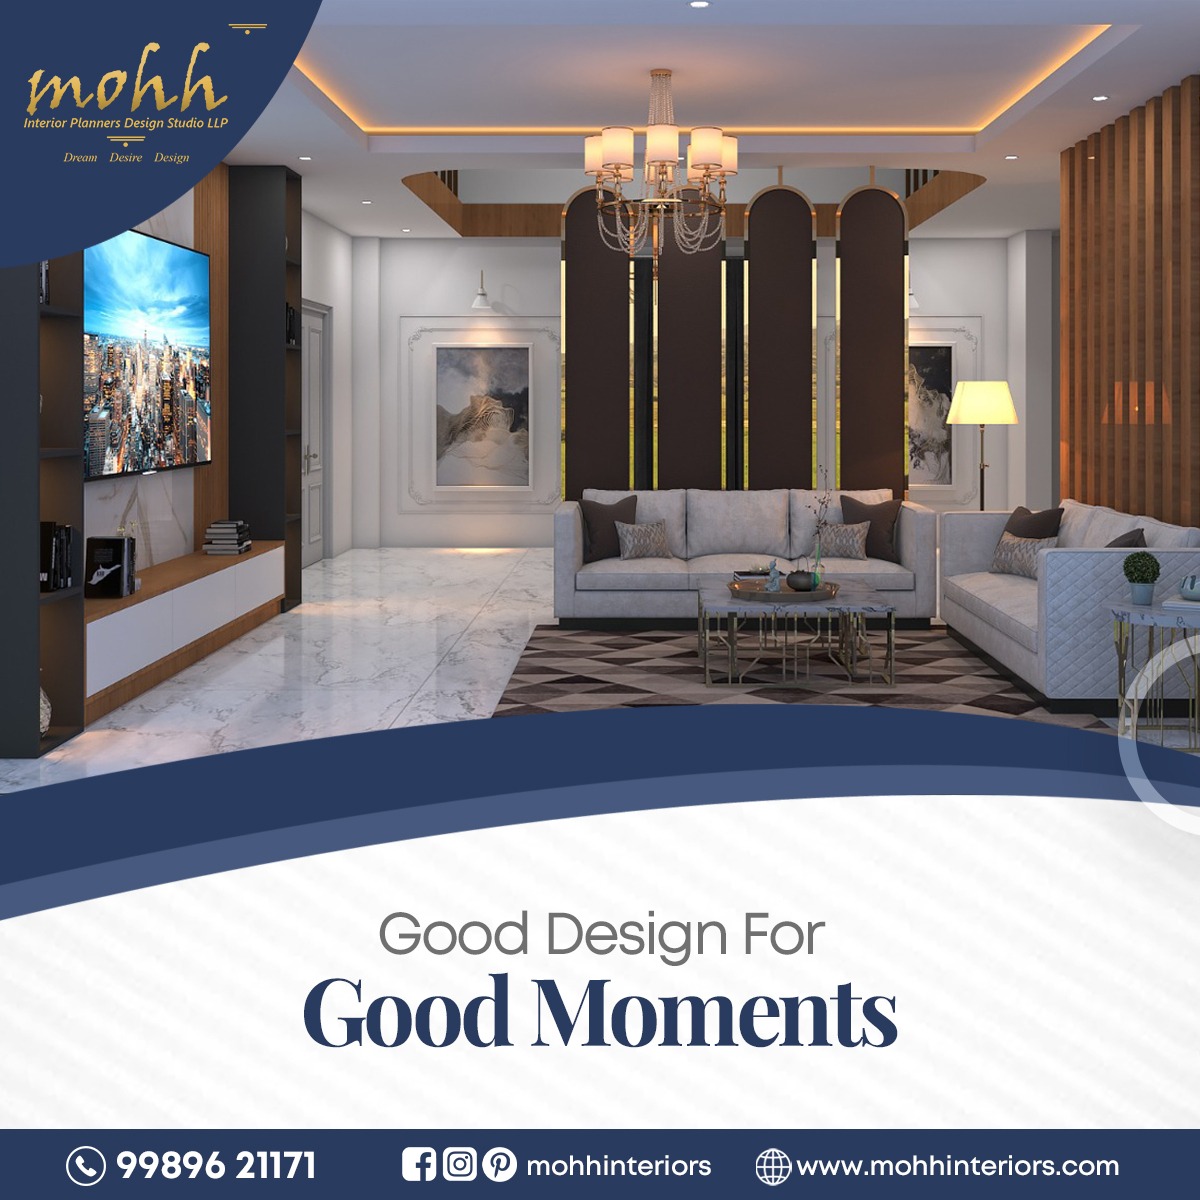 Good Design for Good Moments...
call:  9989621171
visit: mohhinteriors.com
#mohhinteriors #interiordesigner #indianarchitects #interiordesign #exteriordesign #HomeDecor  #architects #moderndesign #stylishinteriors #uniquedesigns #Hyderabad #interiors